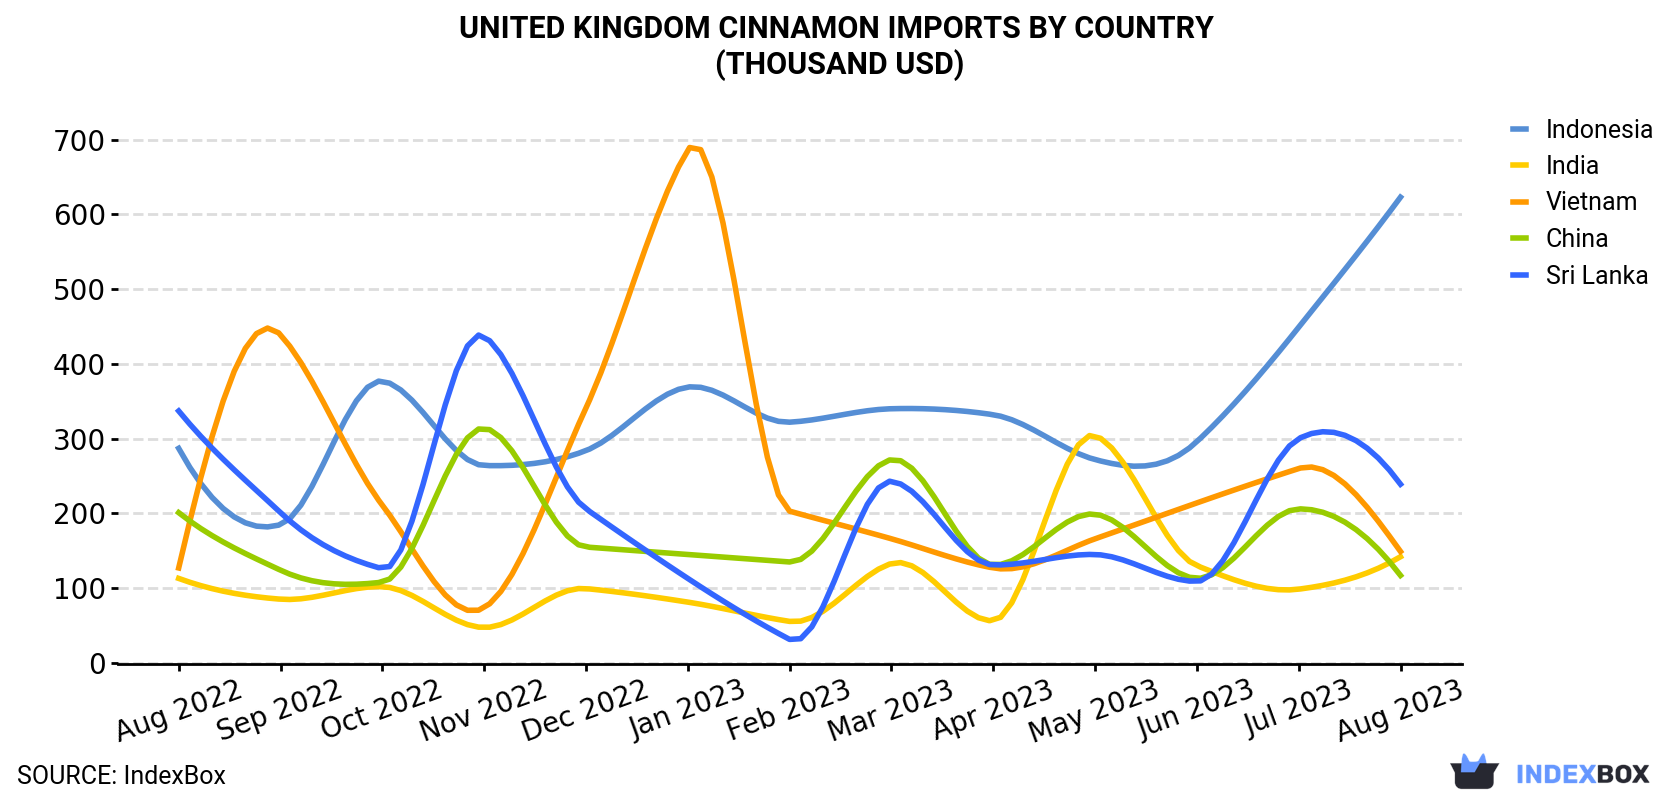 United Kingdom Cinnamon Imports By Country (Thousand USD)